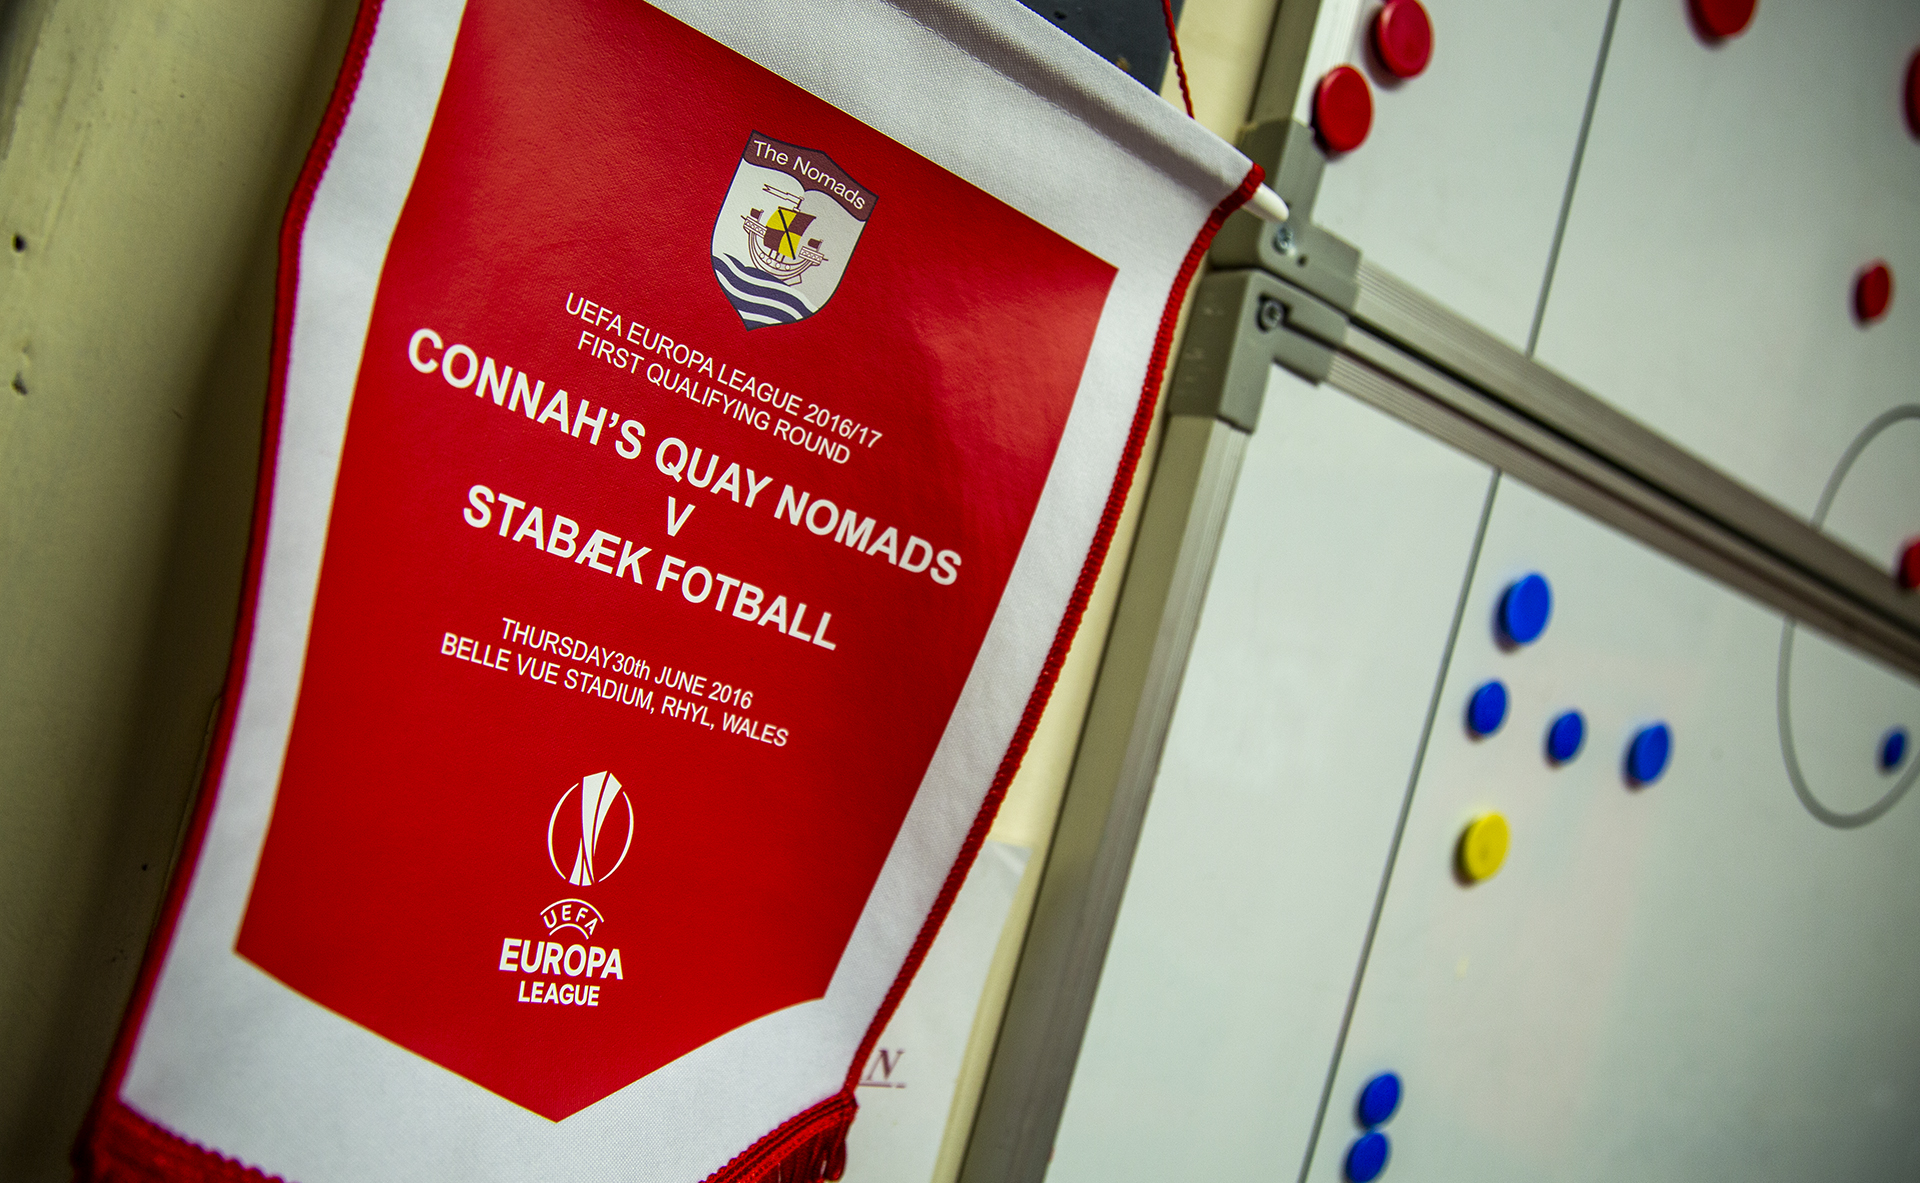 The Nomads' pennant ahead of kick off | © NCM Media